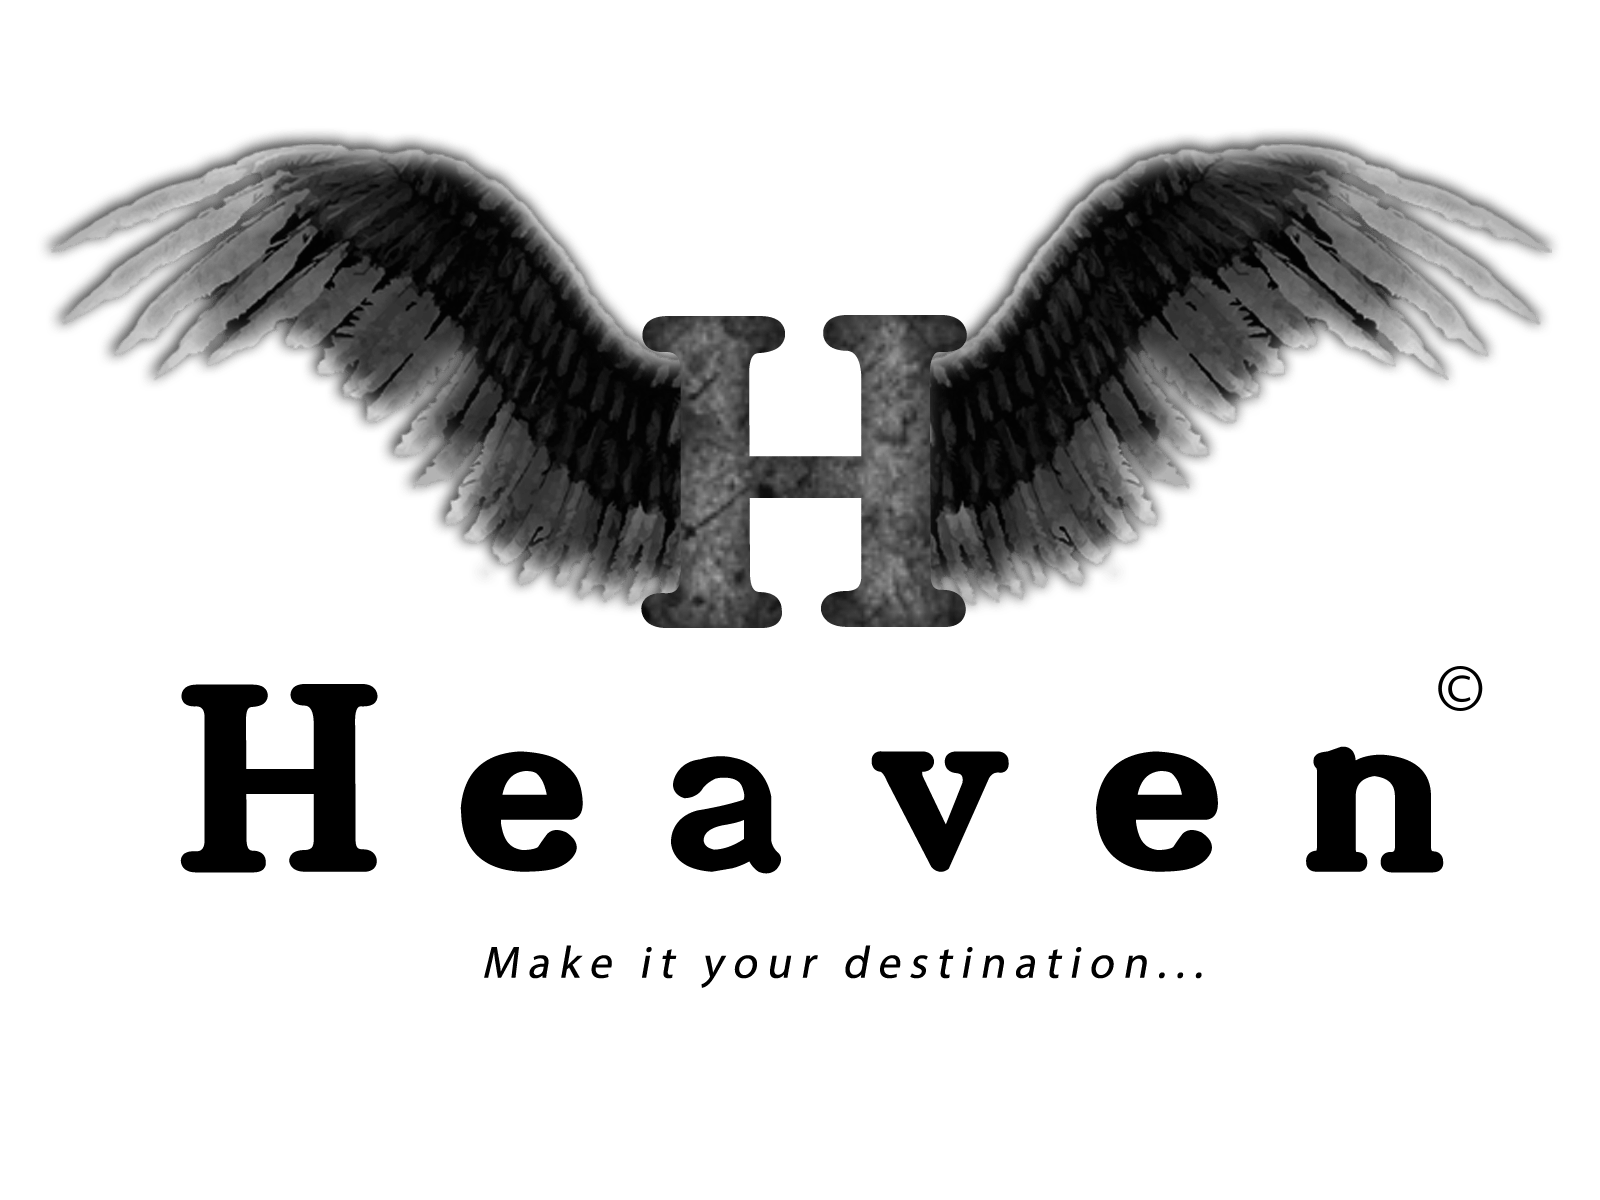 Heaven Logo Photos and Images | Shutterstock